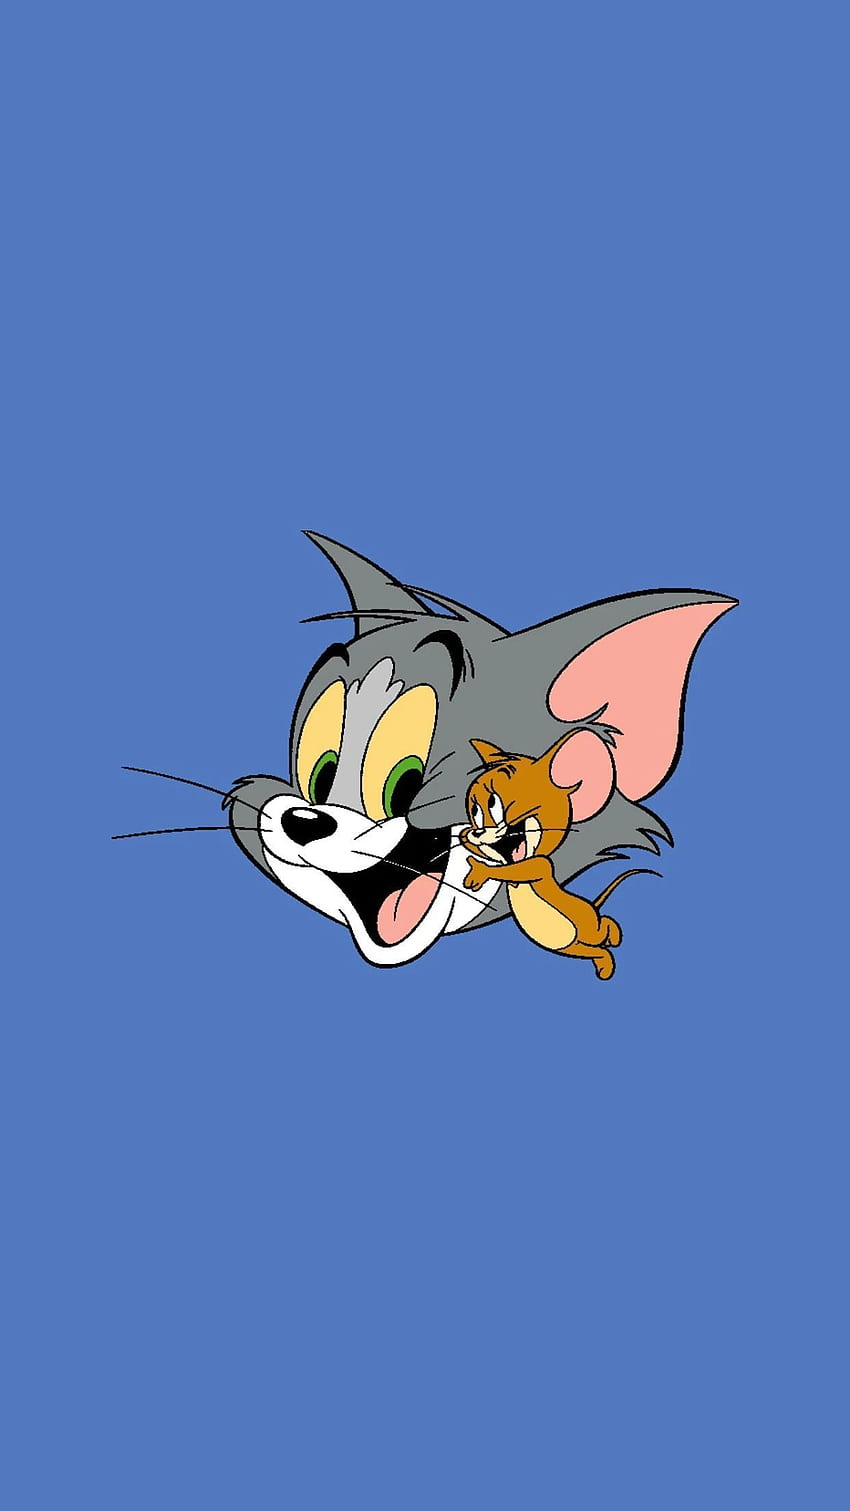 Phone to Commemorate Tom and Jerry's Animator Gene Deitch. Tom and jerry , Tom and jerry , Tom and jerry, Cute Tom and Jerry HD phone wallpaper